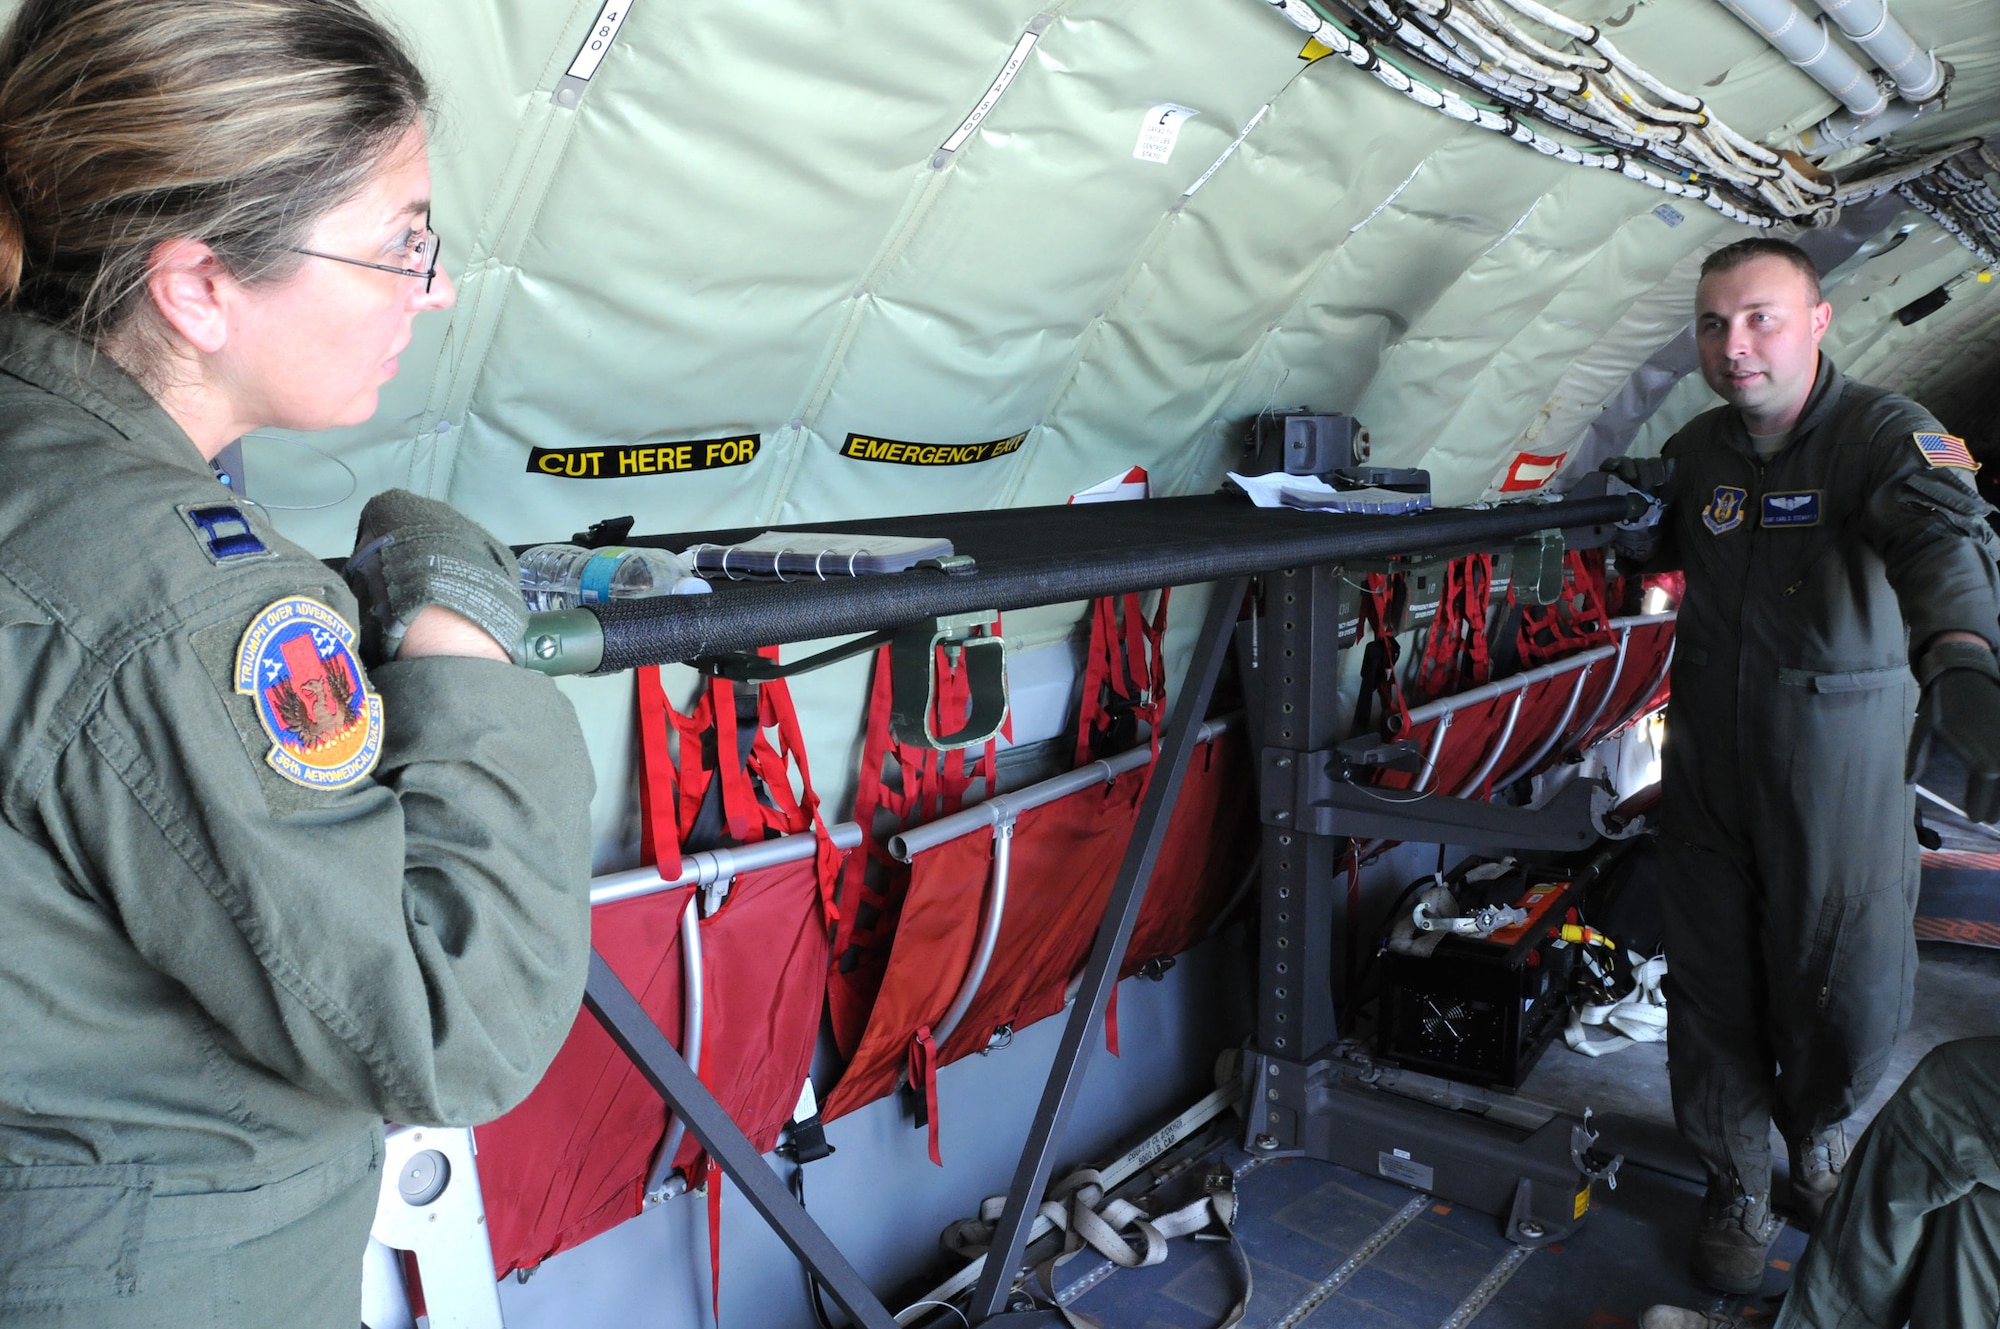 Staff Sgt. Carl Stewart II (right), 459th Aeromedical Evacuation Squadron, explains to Capt. Constance Mackus, 36th AES, how to put together a Patient Support Pallet, on a KC-135R Stratotanker in Melbourne, Fla, June 26. PSPs are used aboard aircraft like the KC-135R, the C-17 Globemaster III and the C-130 to allow aeromedical evacuation specialists to administer care to patients during flight. Sergeant Stewart and Capt. Mackus joined other Airmen from the 36th AES and the 43rd AES in a three-day Total Force aeromedical evacuation training miission here. (U.S. Air Force photo/Staff Sgt. Steve Lewis)